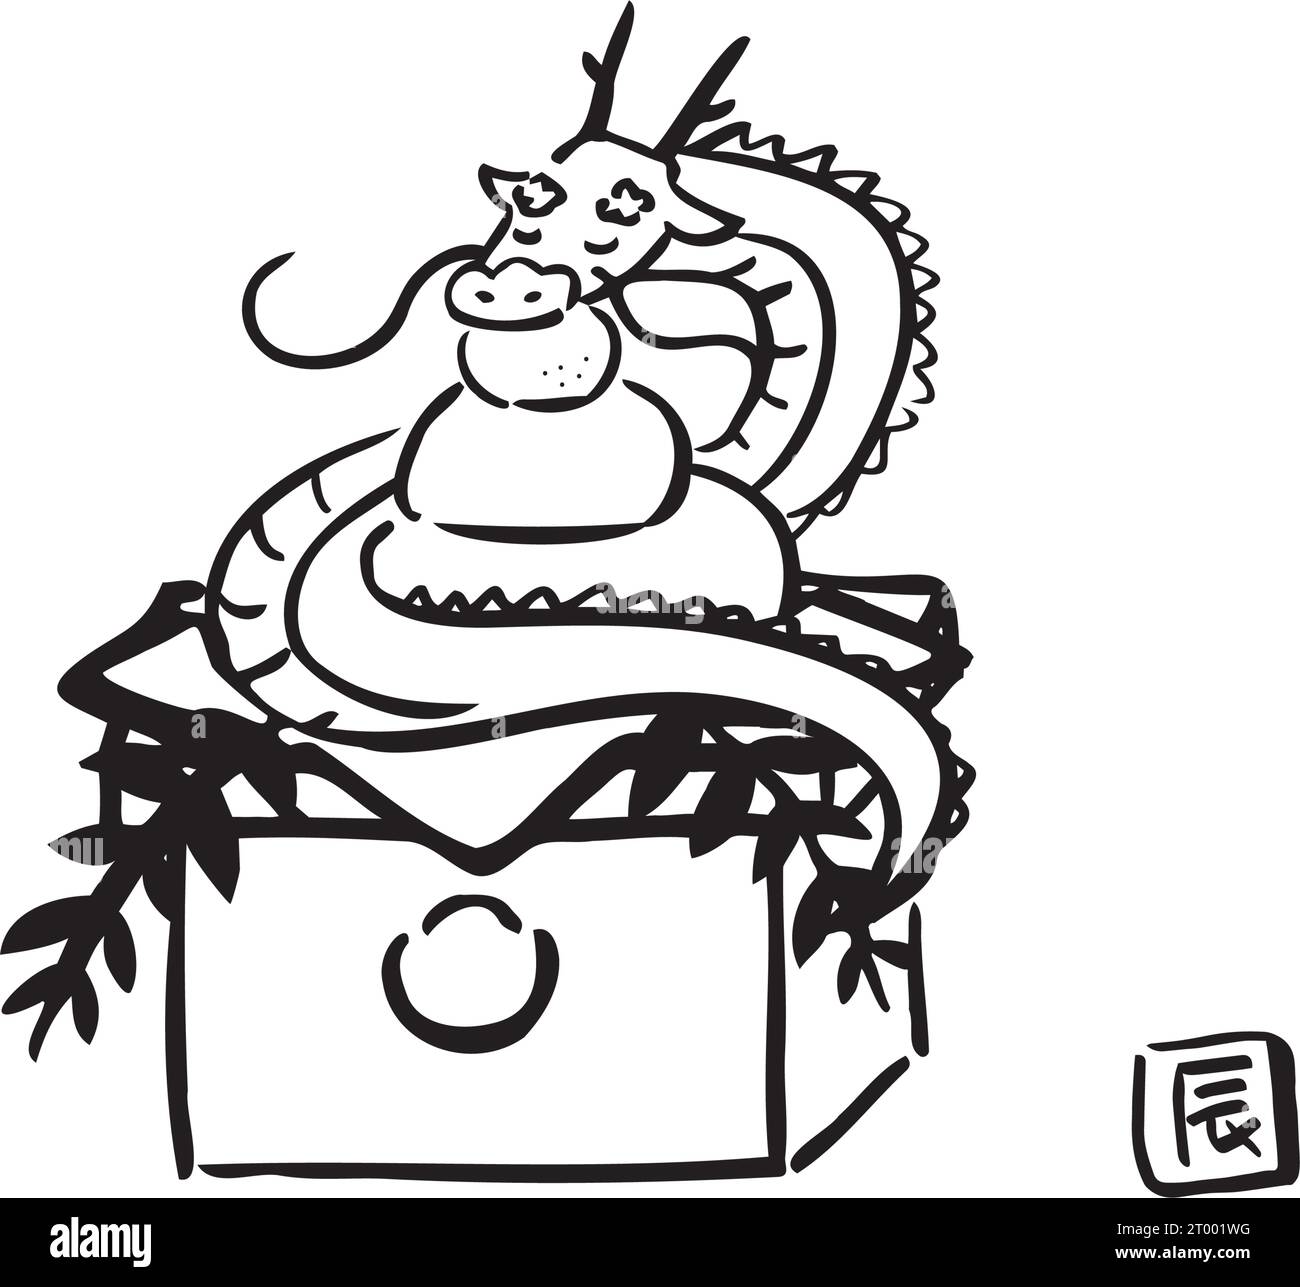 Illustration of a dragon wrapped around a kagami mochi. New Year's card material for the Year of the Dragon. Stock Vector